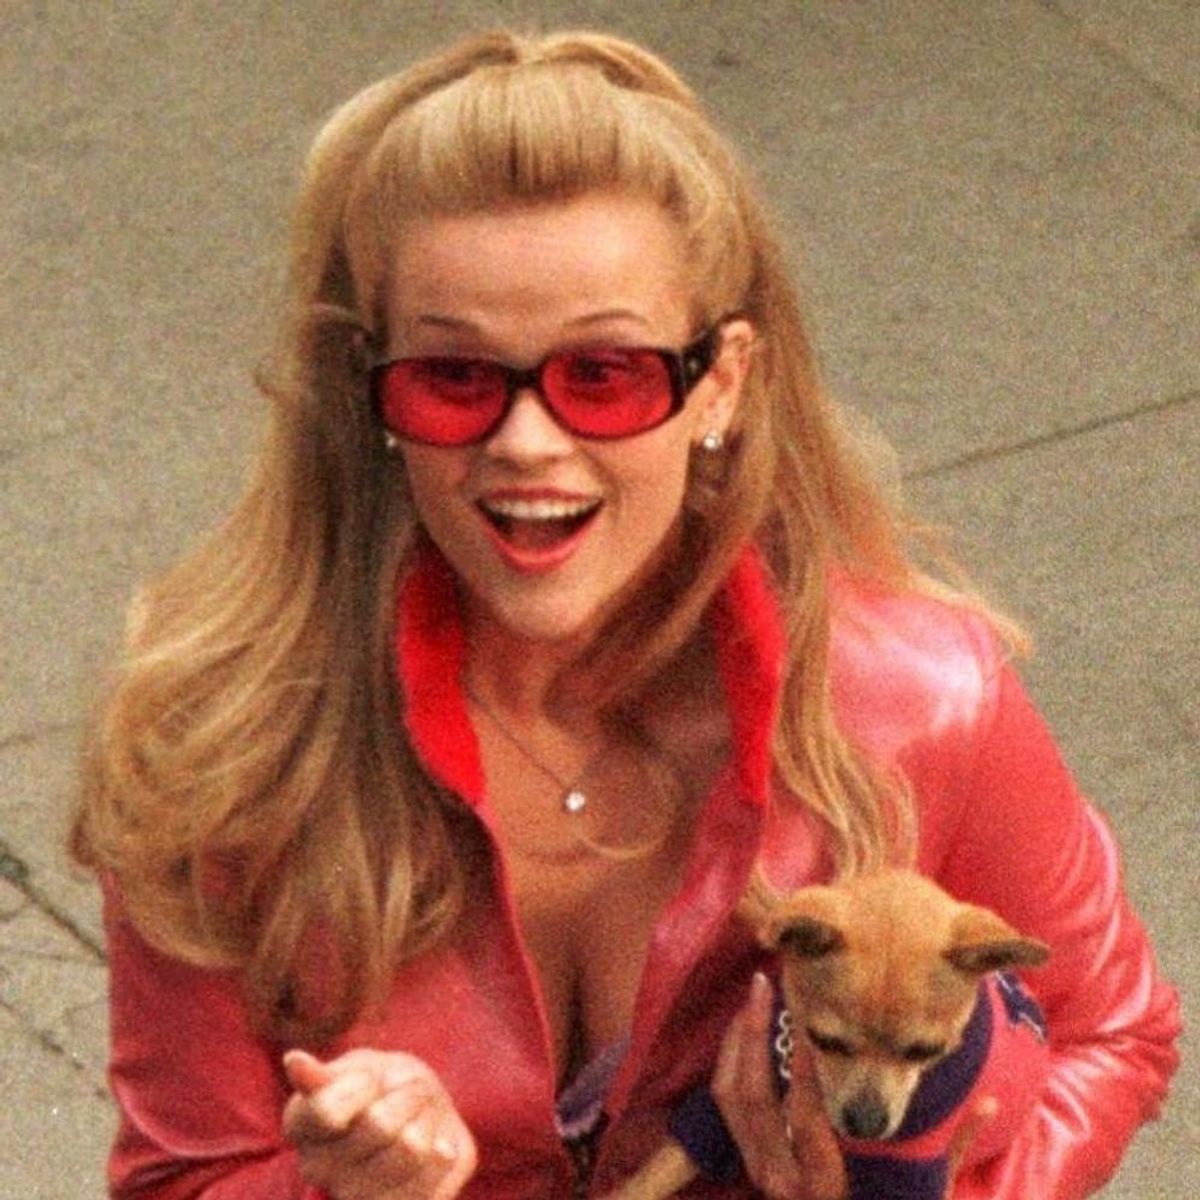 Why Reese Witherspoon and Luke Wilson Had to Wear Wigs for Part of ‘Legally Blonde’